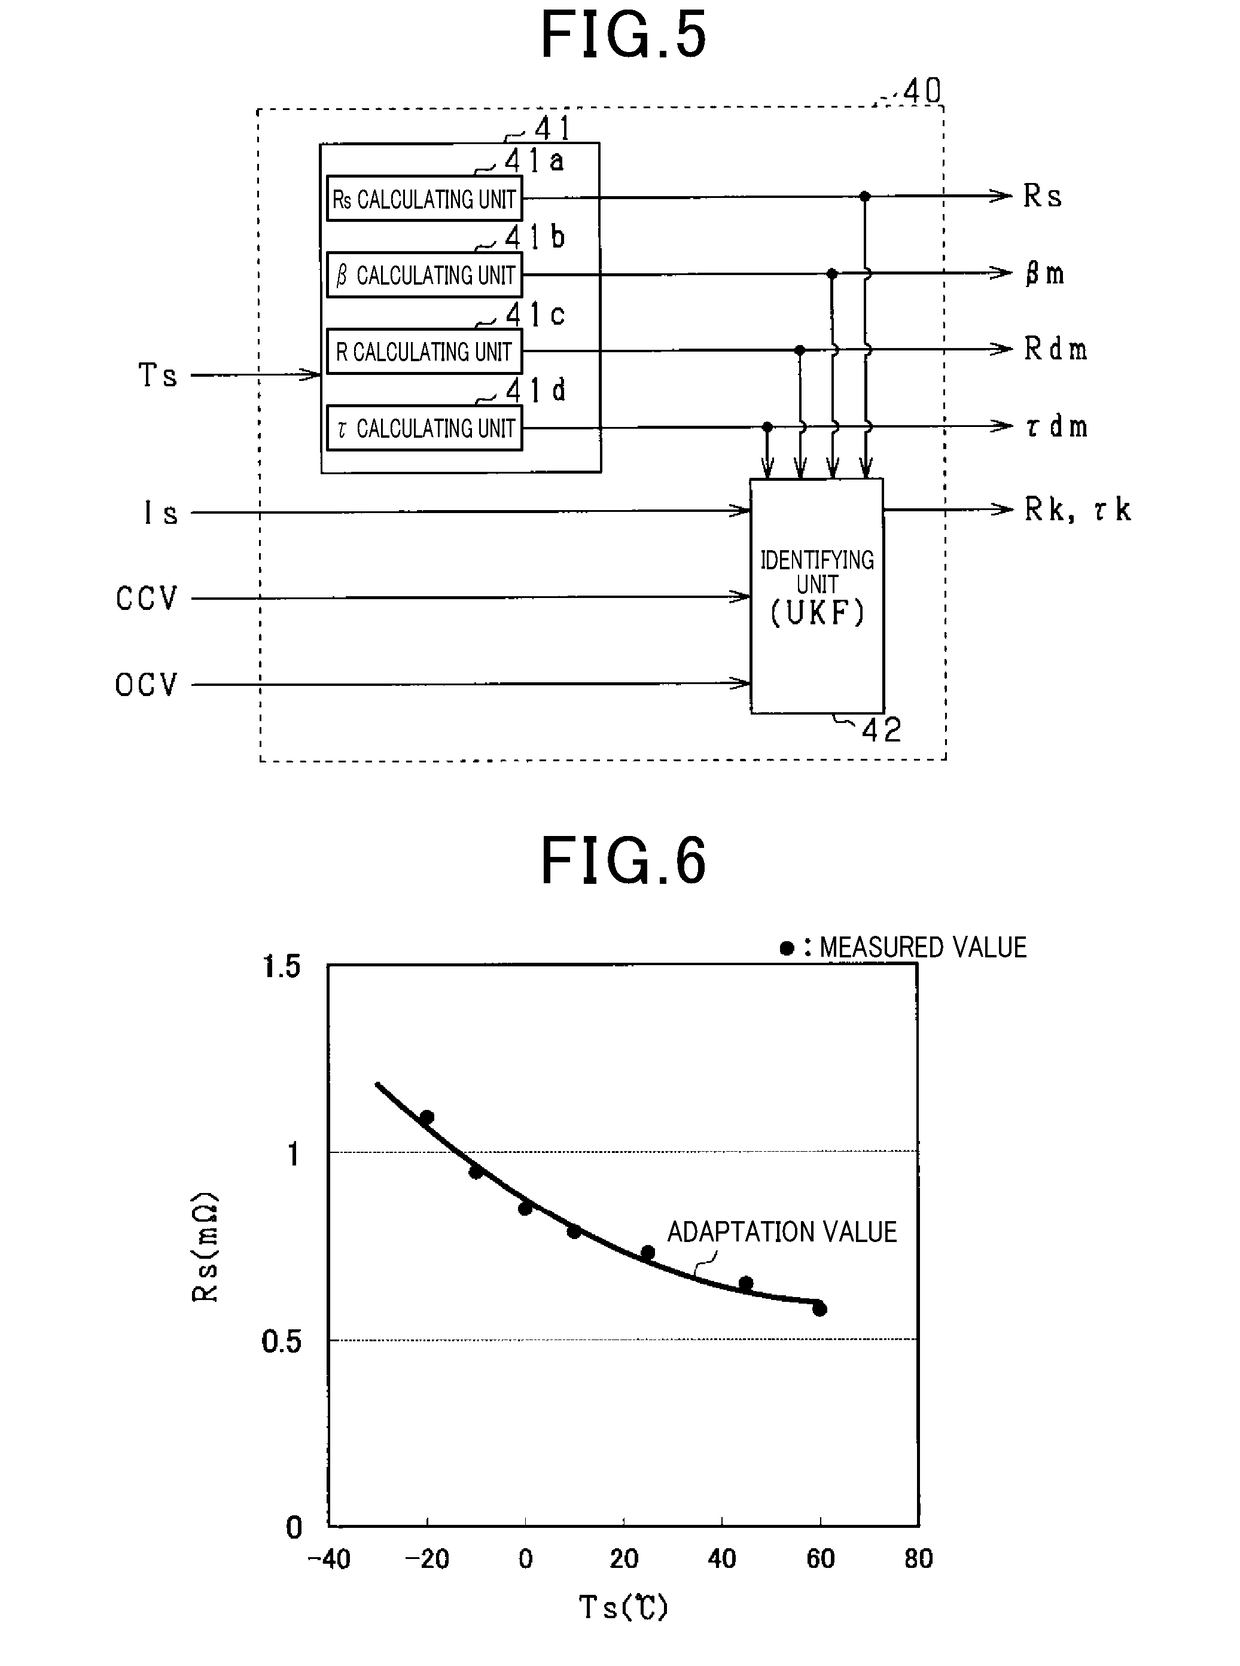 Battery state estimating device